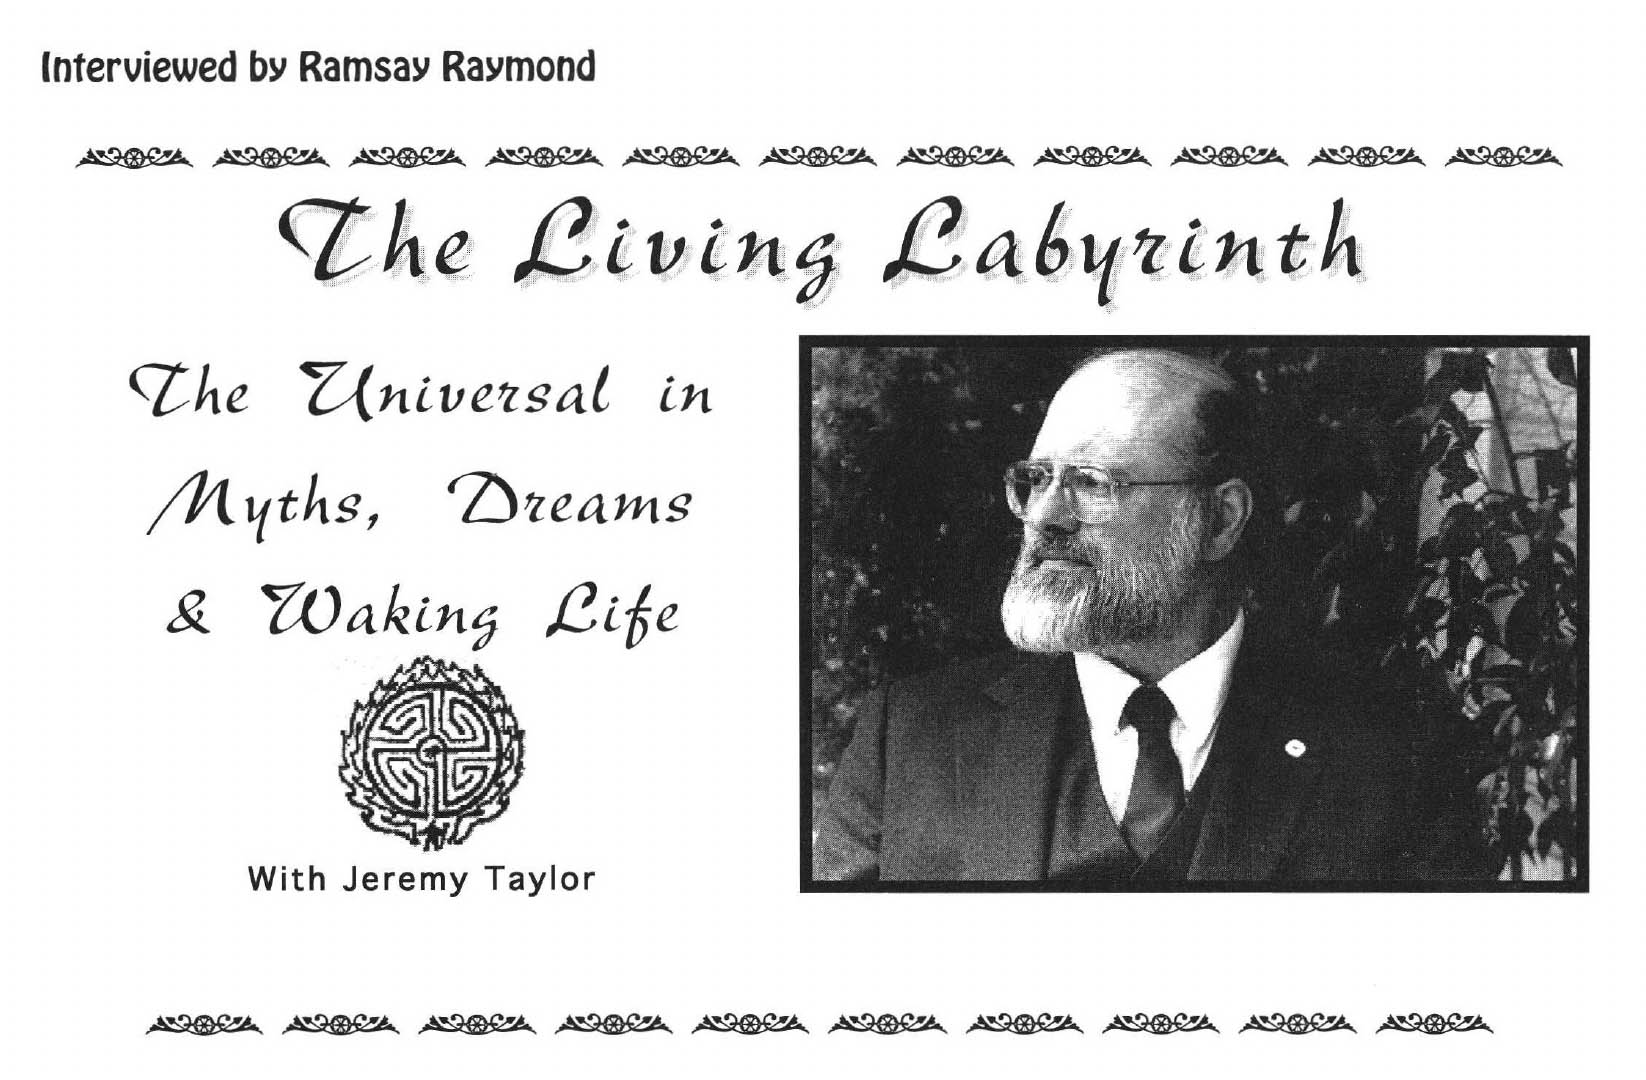 The Living Labyrinth - The Universal in Myths, Dreams & Waking Life: An Interview with Jeremy Taylor